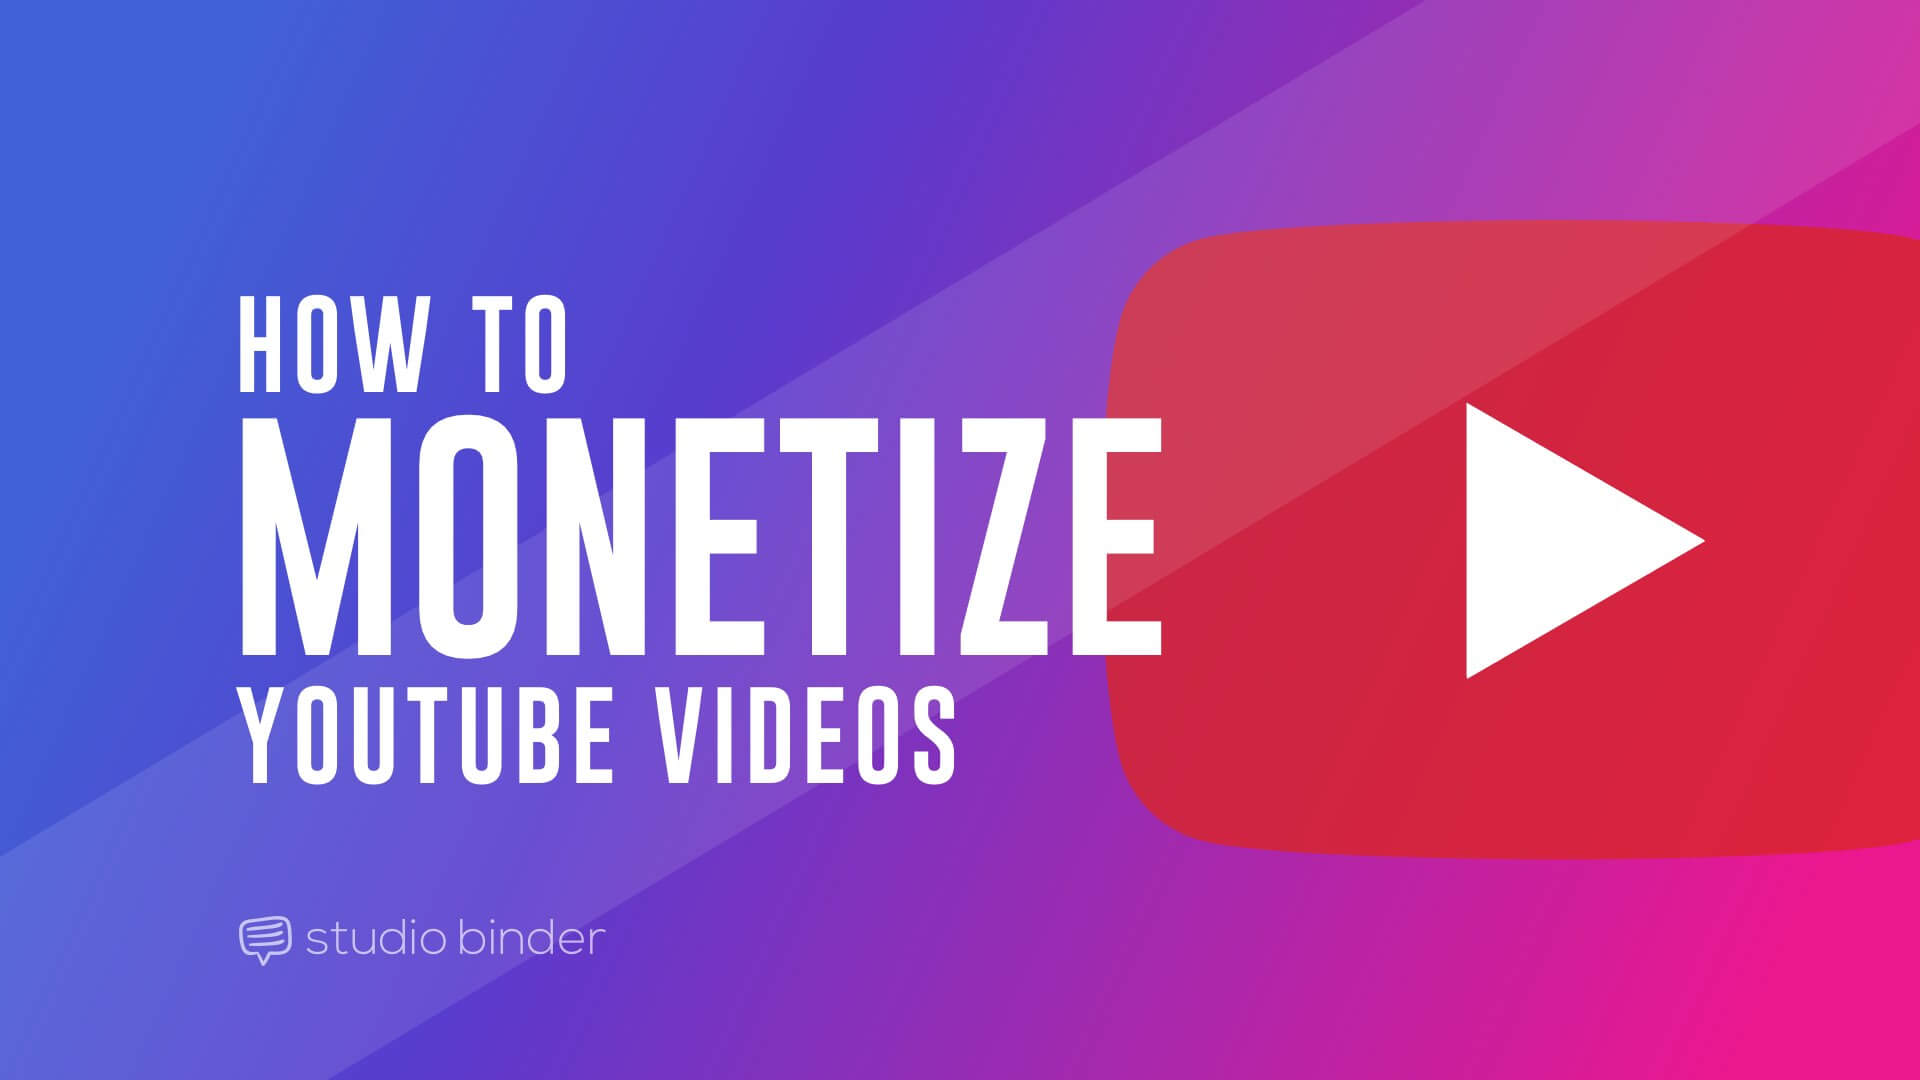 How To Make Money On Youtube Complete Video Monetization Guide - 